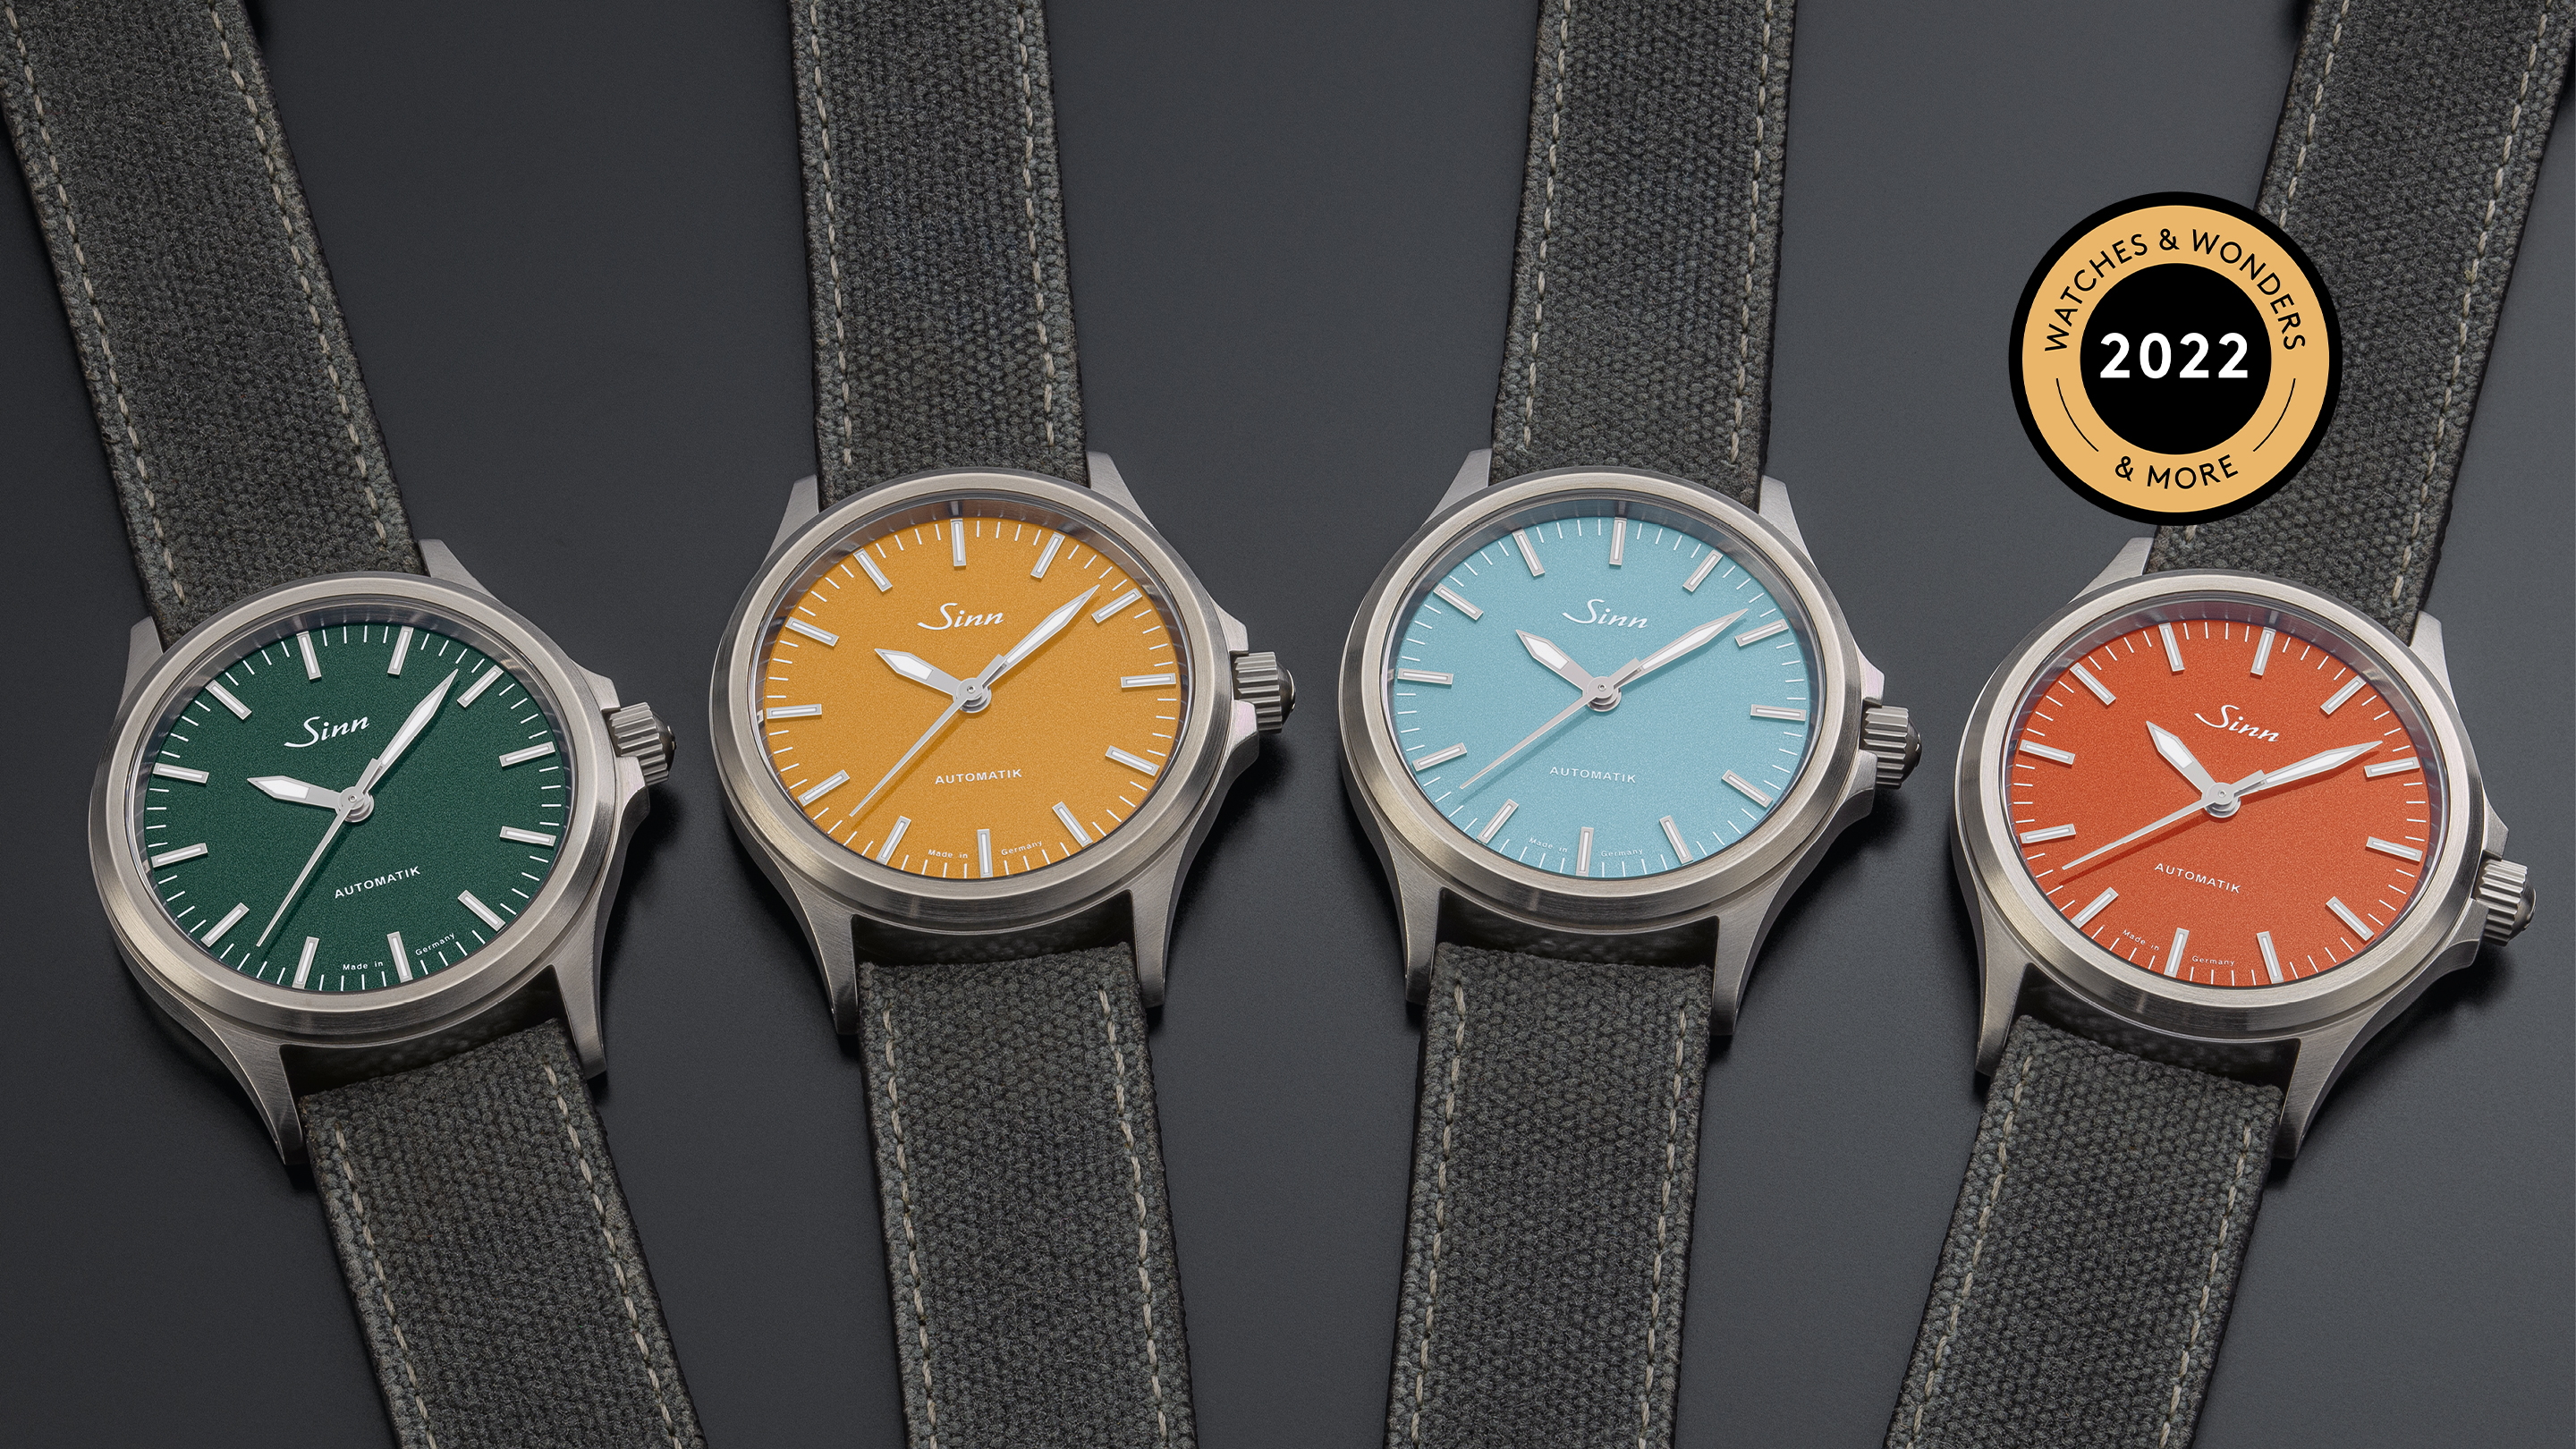 Sinn Launches New Colorful 556 Models